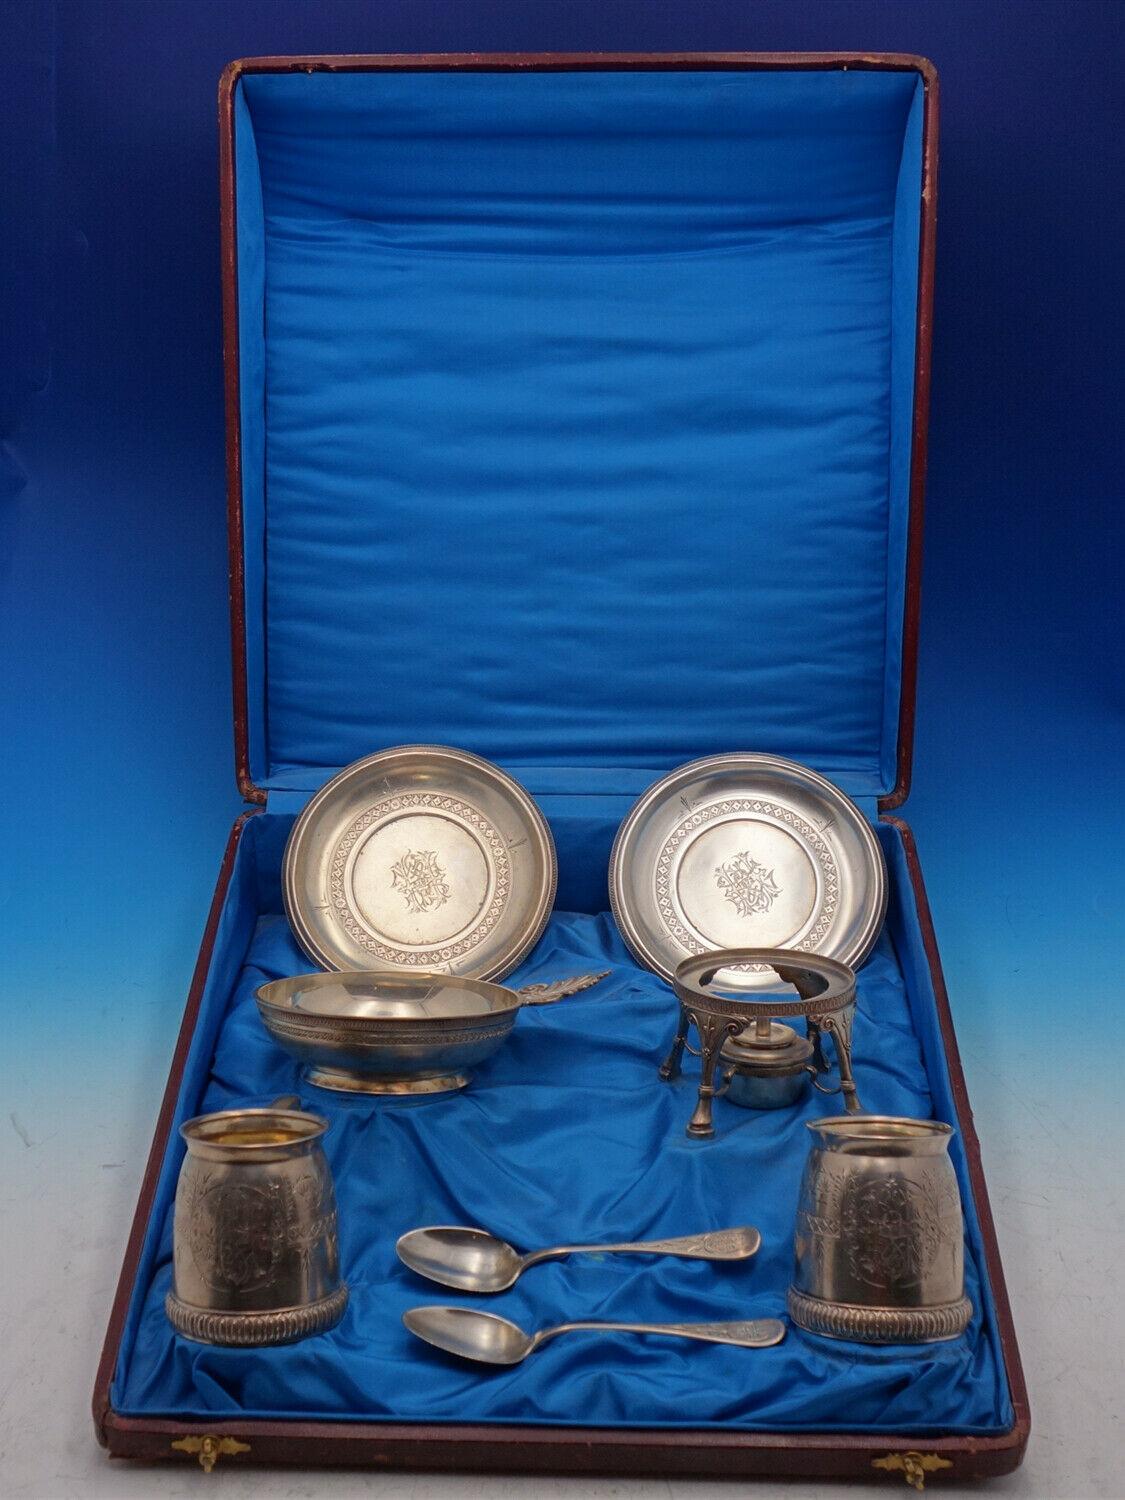 Tiffany and Co

Amazing Tiffany and Co sterling silver child's 8-piece set dated 1872 in massive presentation box with blue satin lining (measures 17 1/2